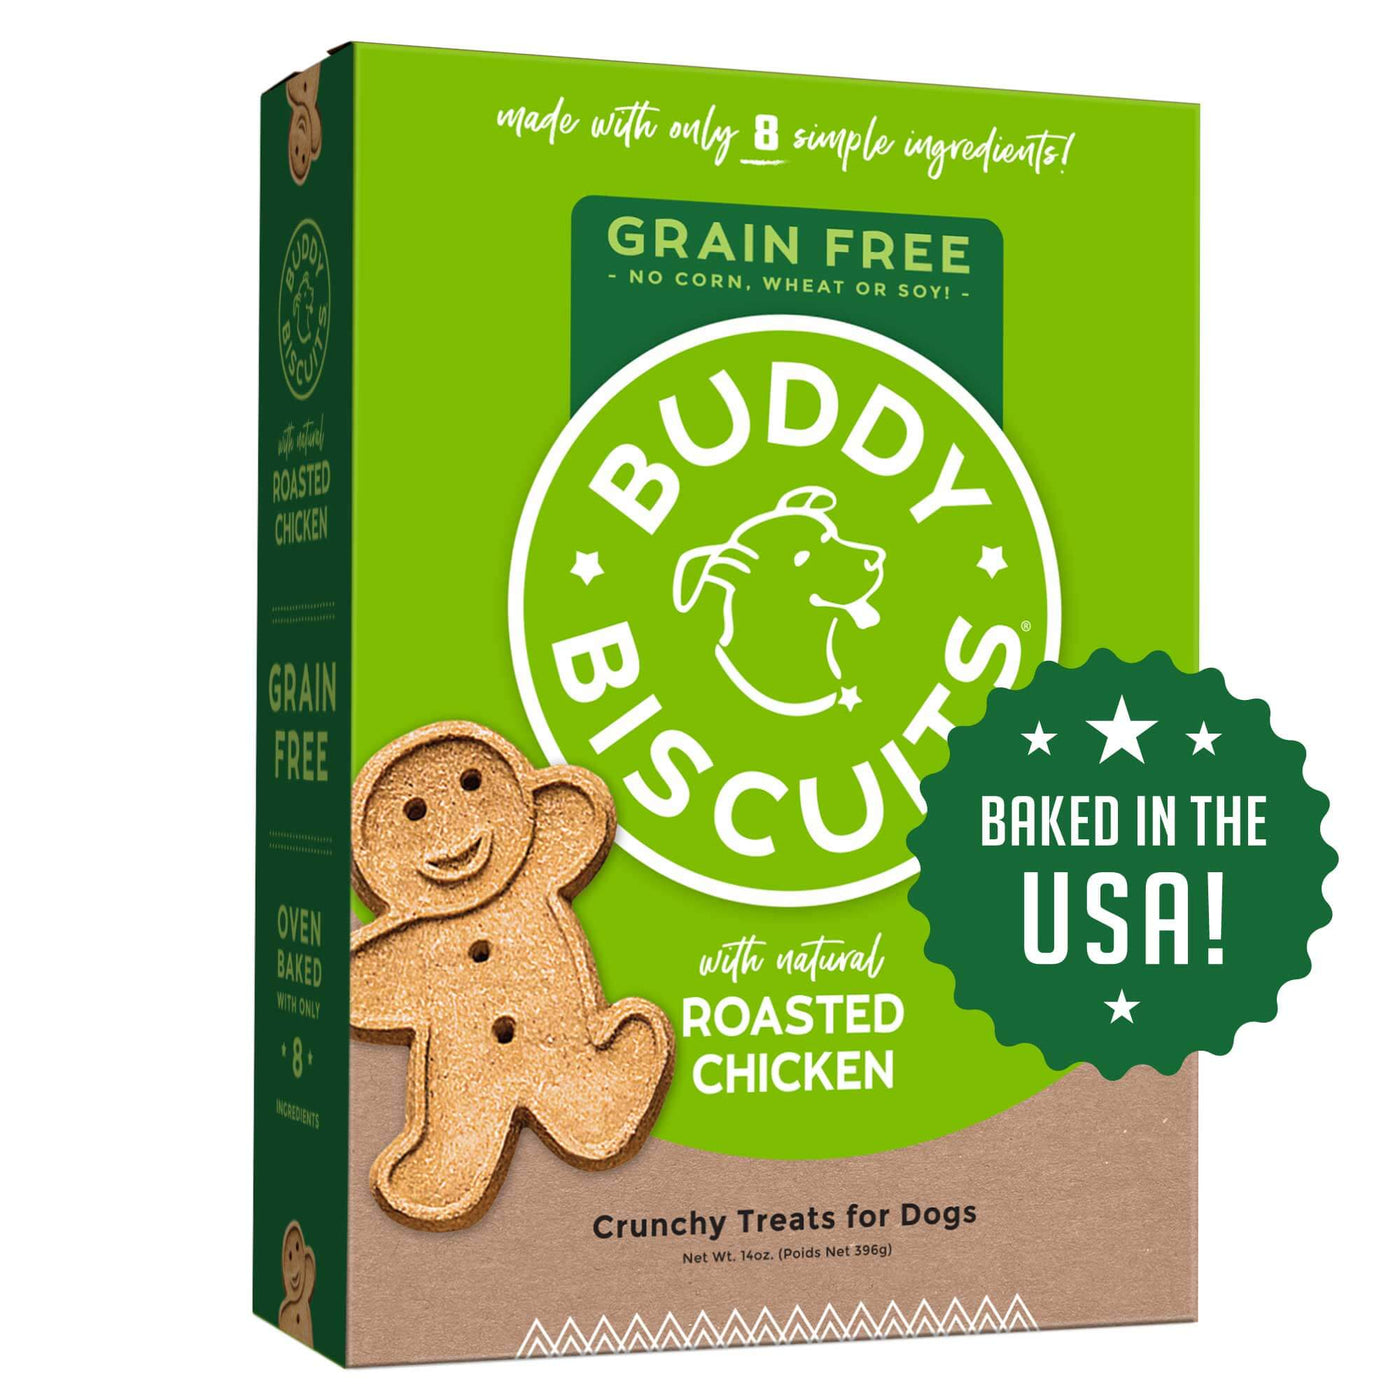 Roasted Chicken Grain Free Oven Baked Dog Treats 14 oz - Buddy Biscuits - PetToba-Buddy Biscuits